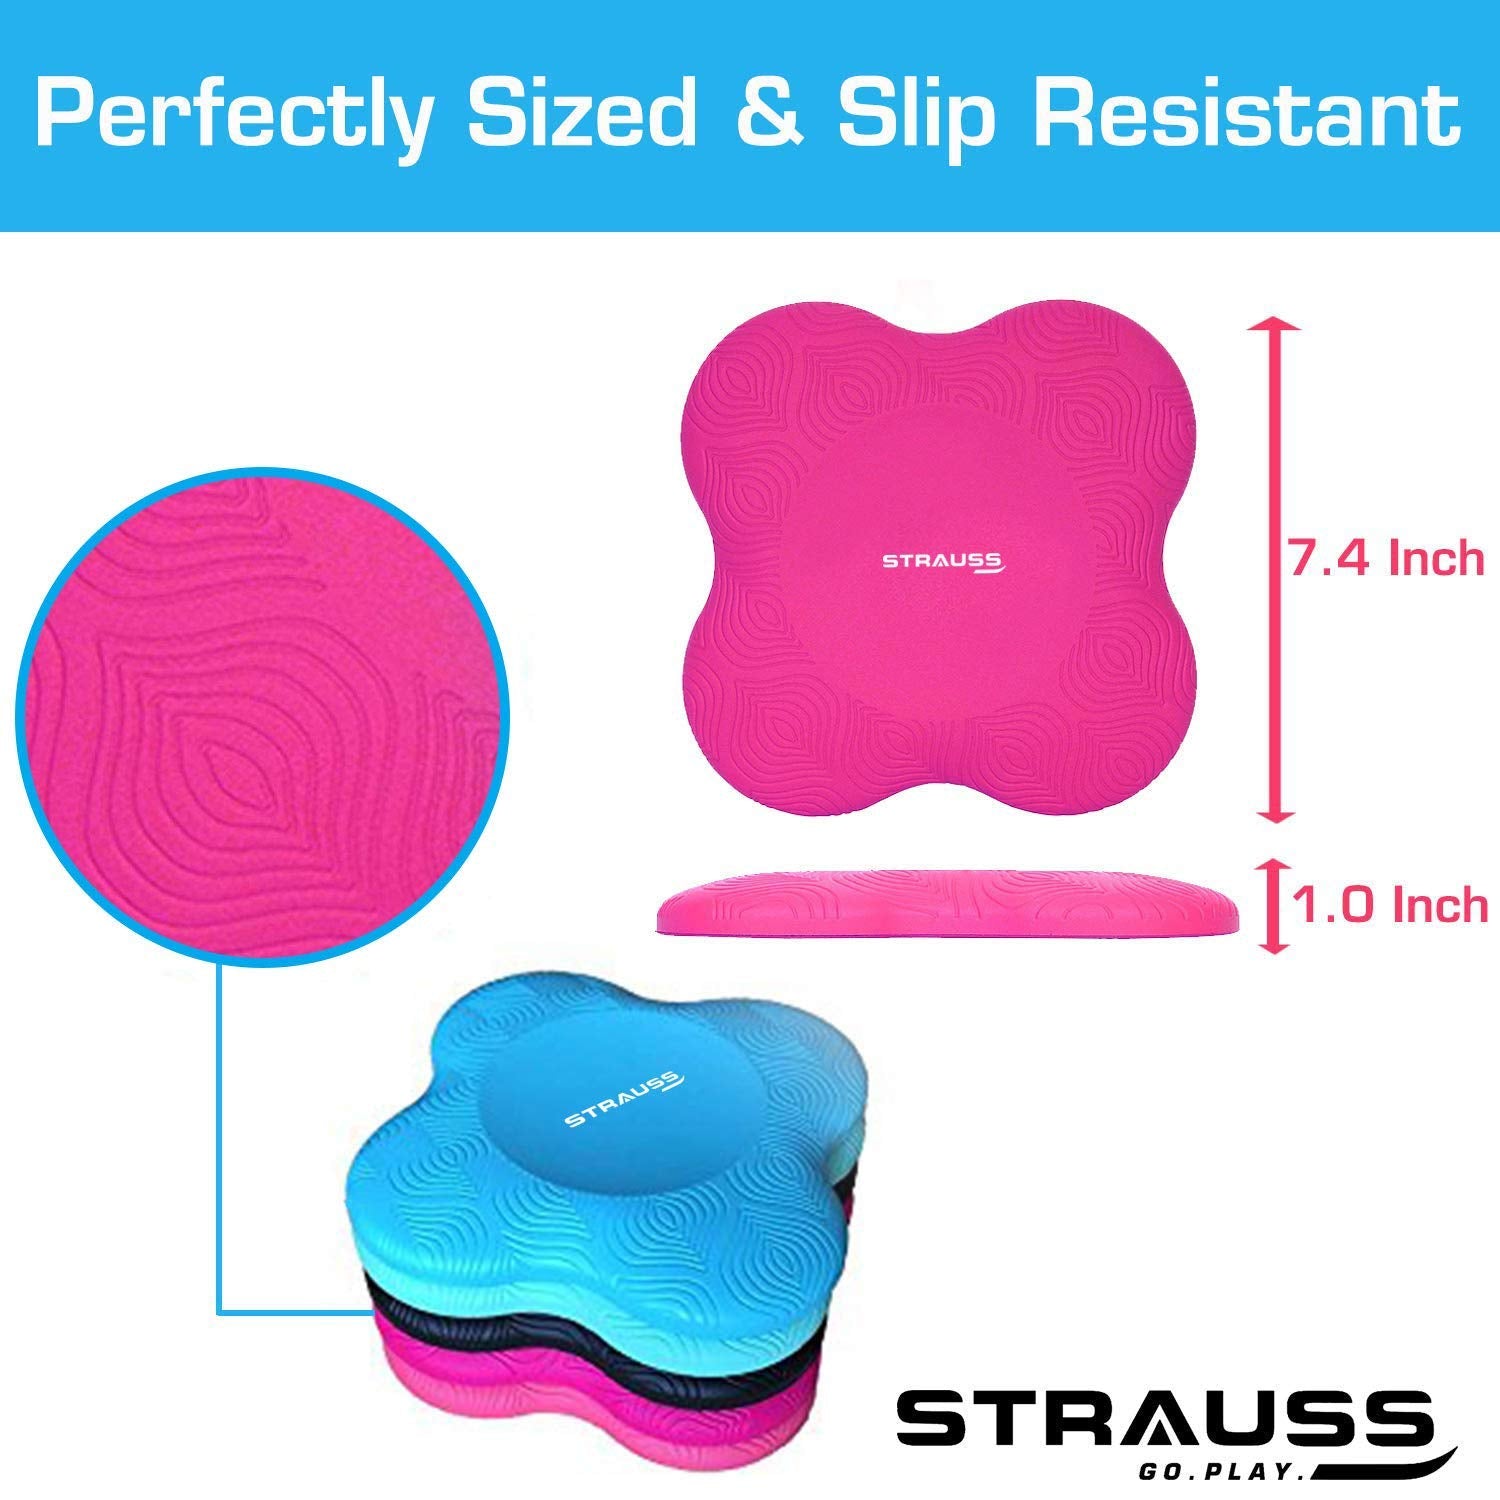 Strauss Yoga Mat, 6mm (Purple Floral) and Yoga Knee Pad Cushions, (Pink)